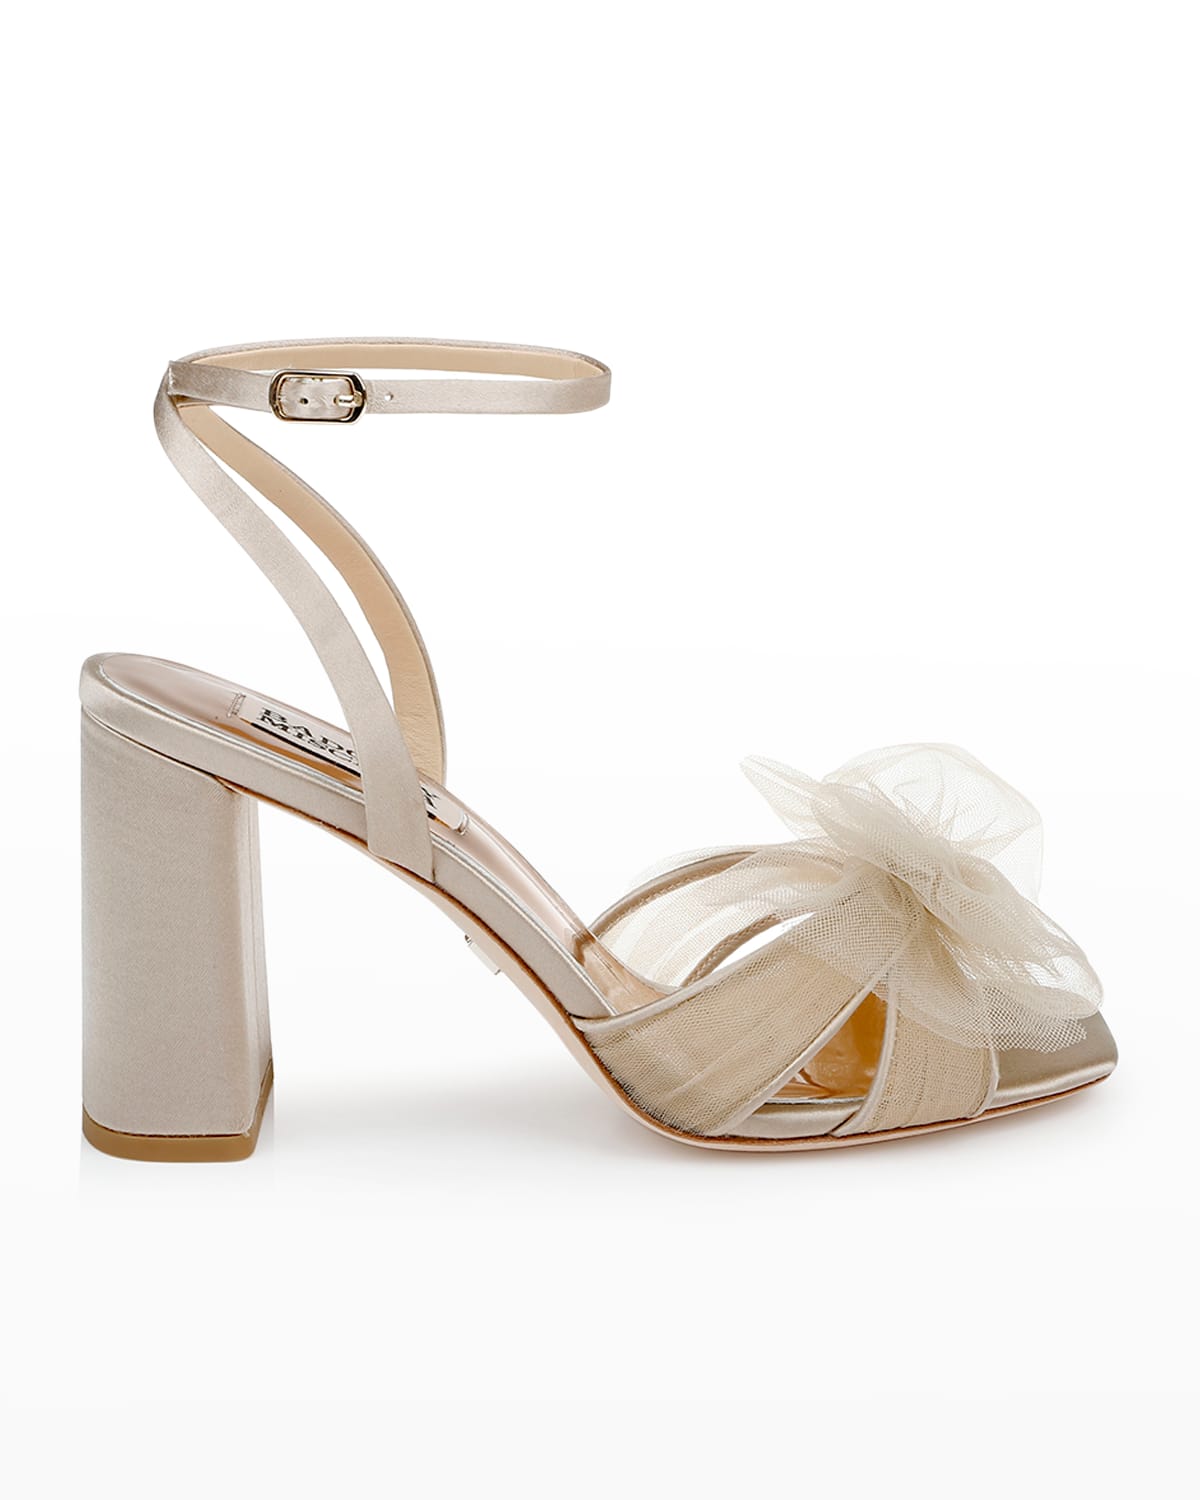 Badgley Mischka Tess Tulle Bow Ankle-Strap Sandals